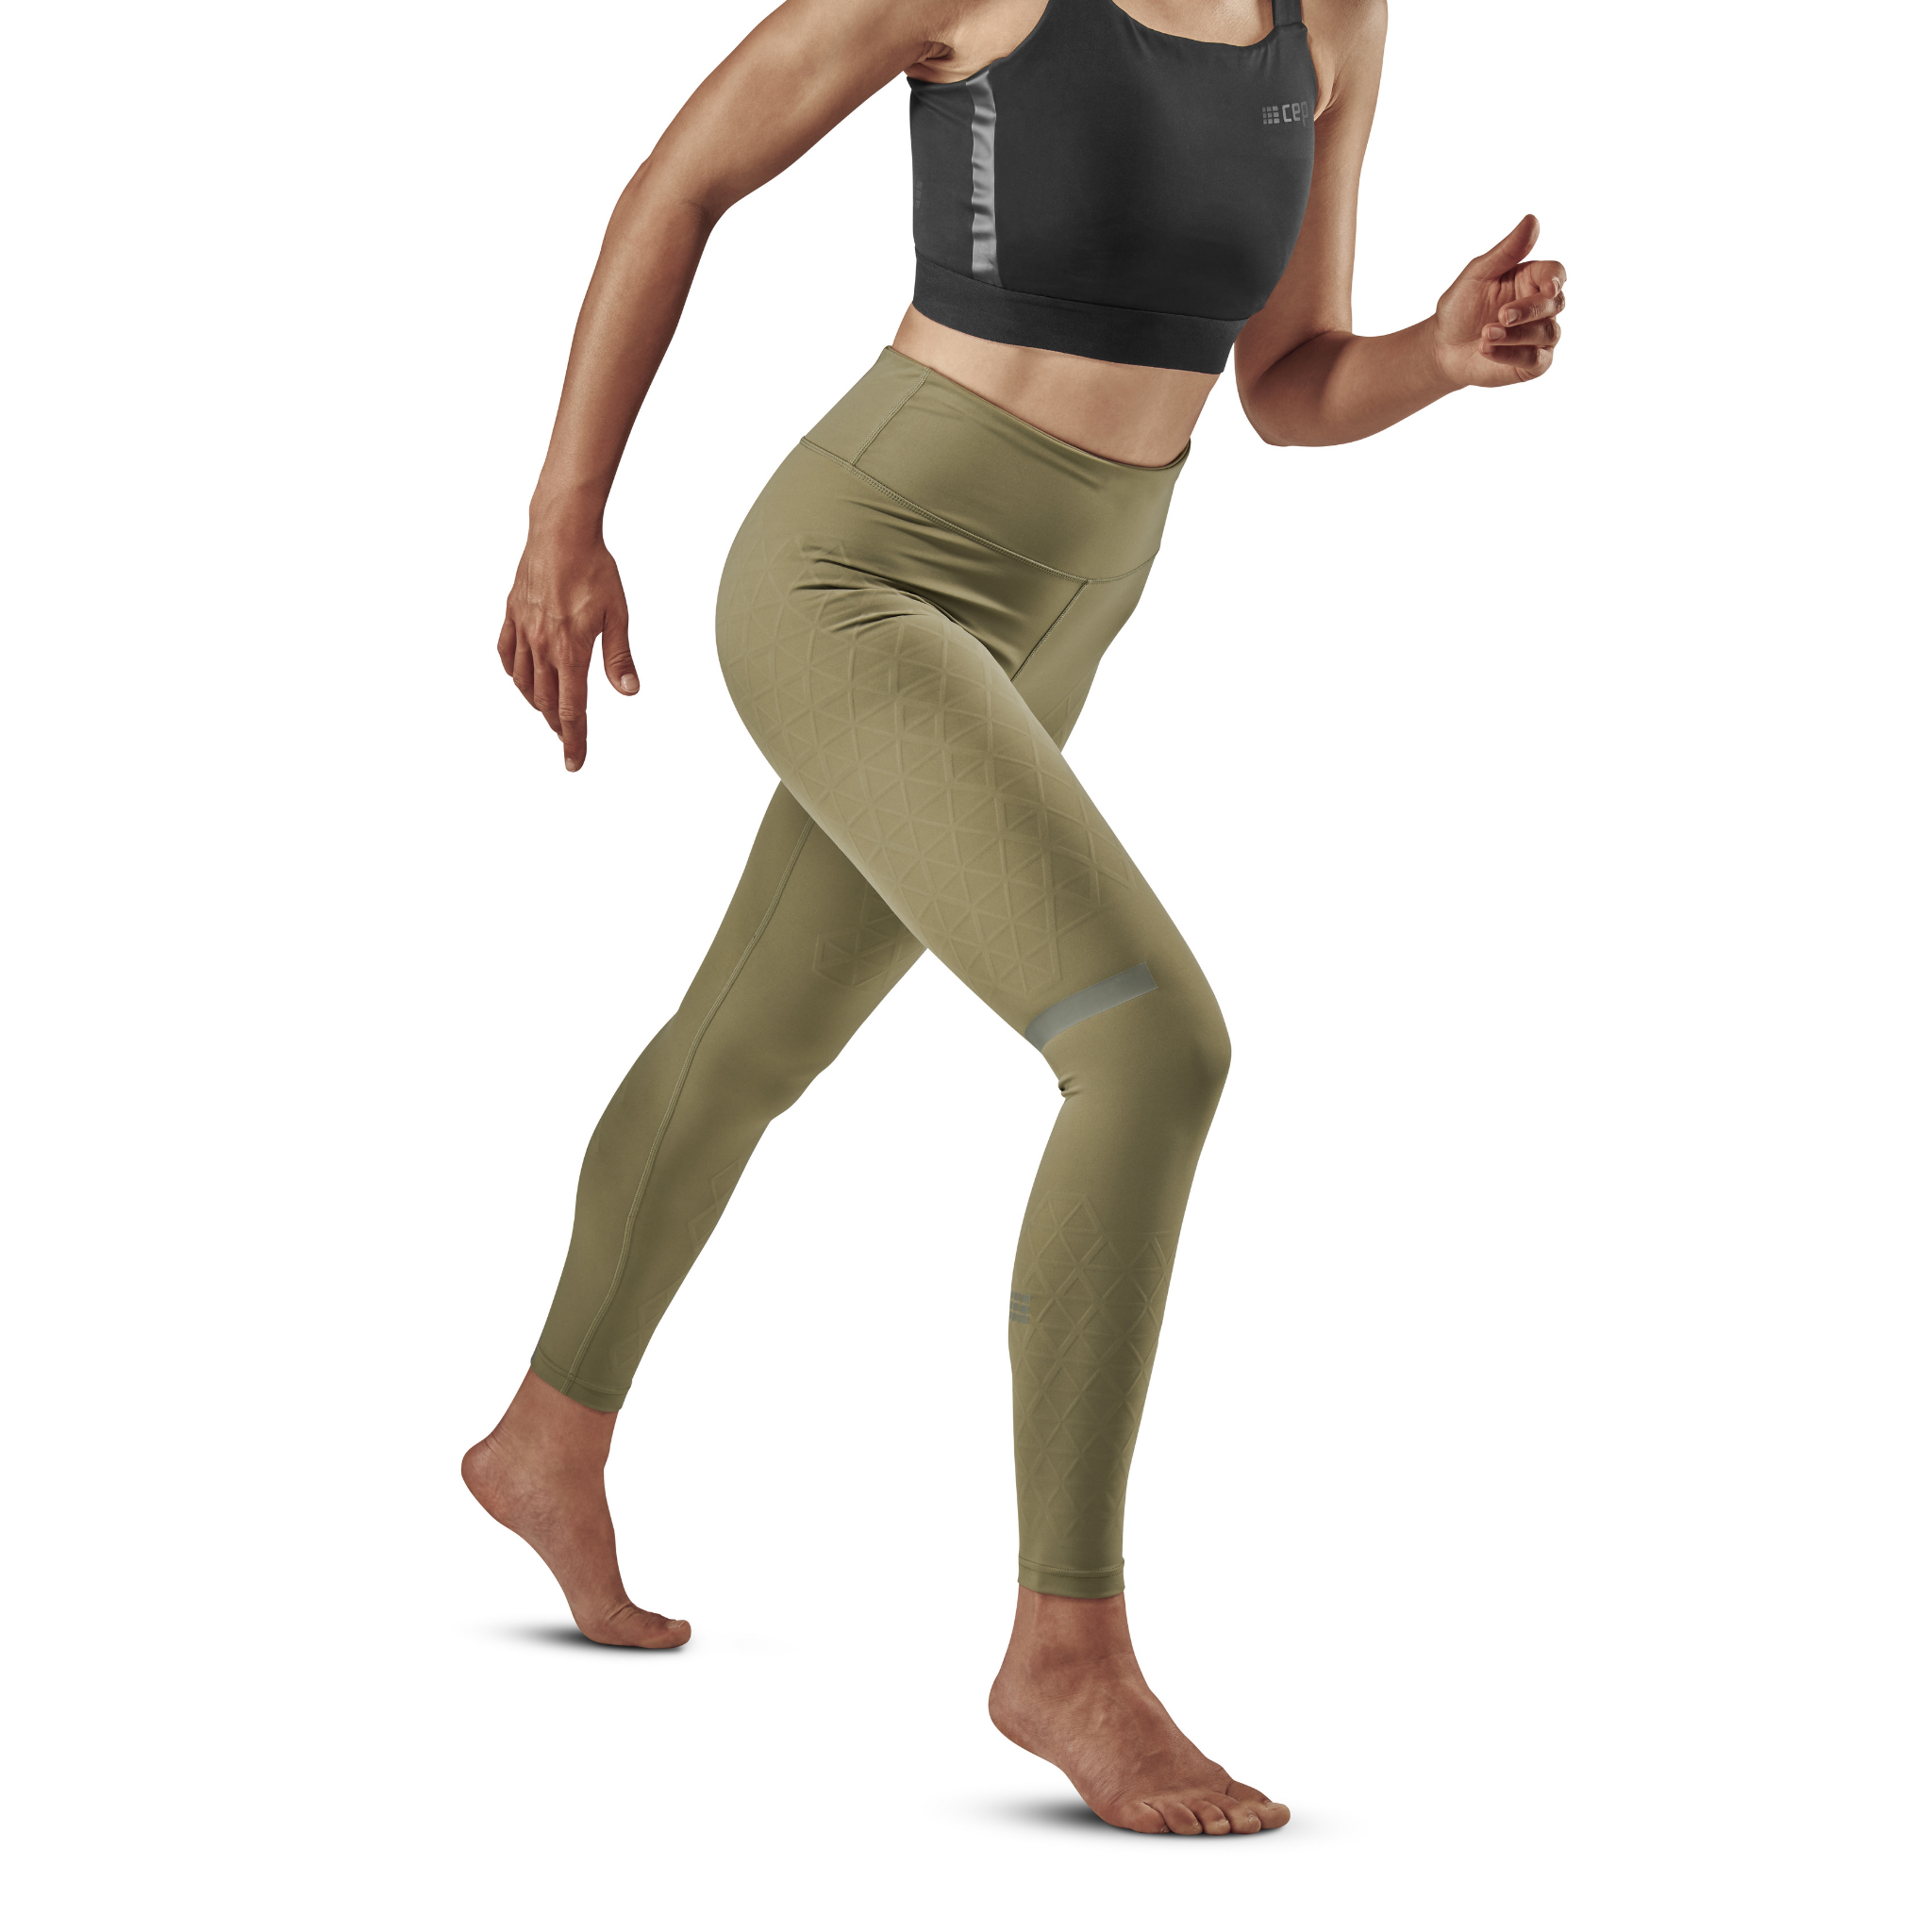 CEP The Run Support Tights, Women